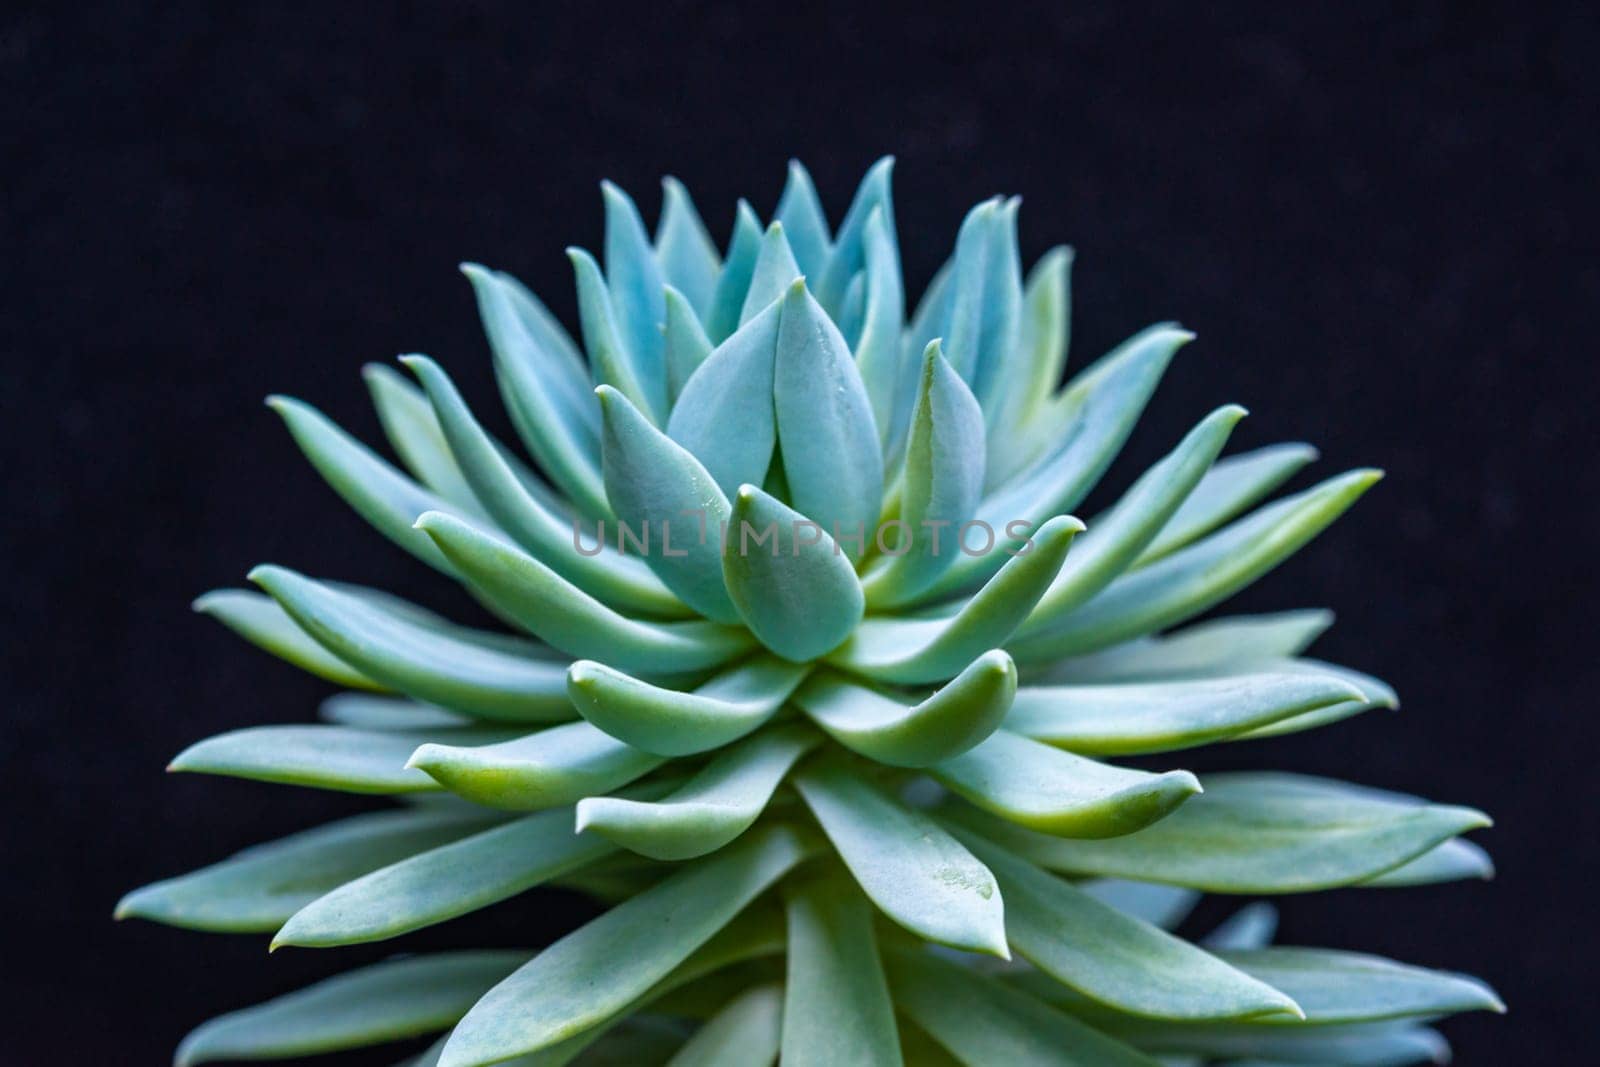 Close-up, succulent leaves of a succulent plant (Echeveria sp., Sedeveria sp.) in a botanical collection by Hydrobiolog